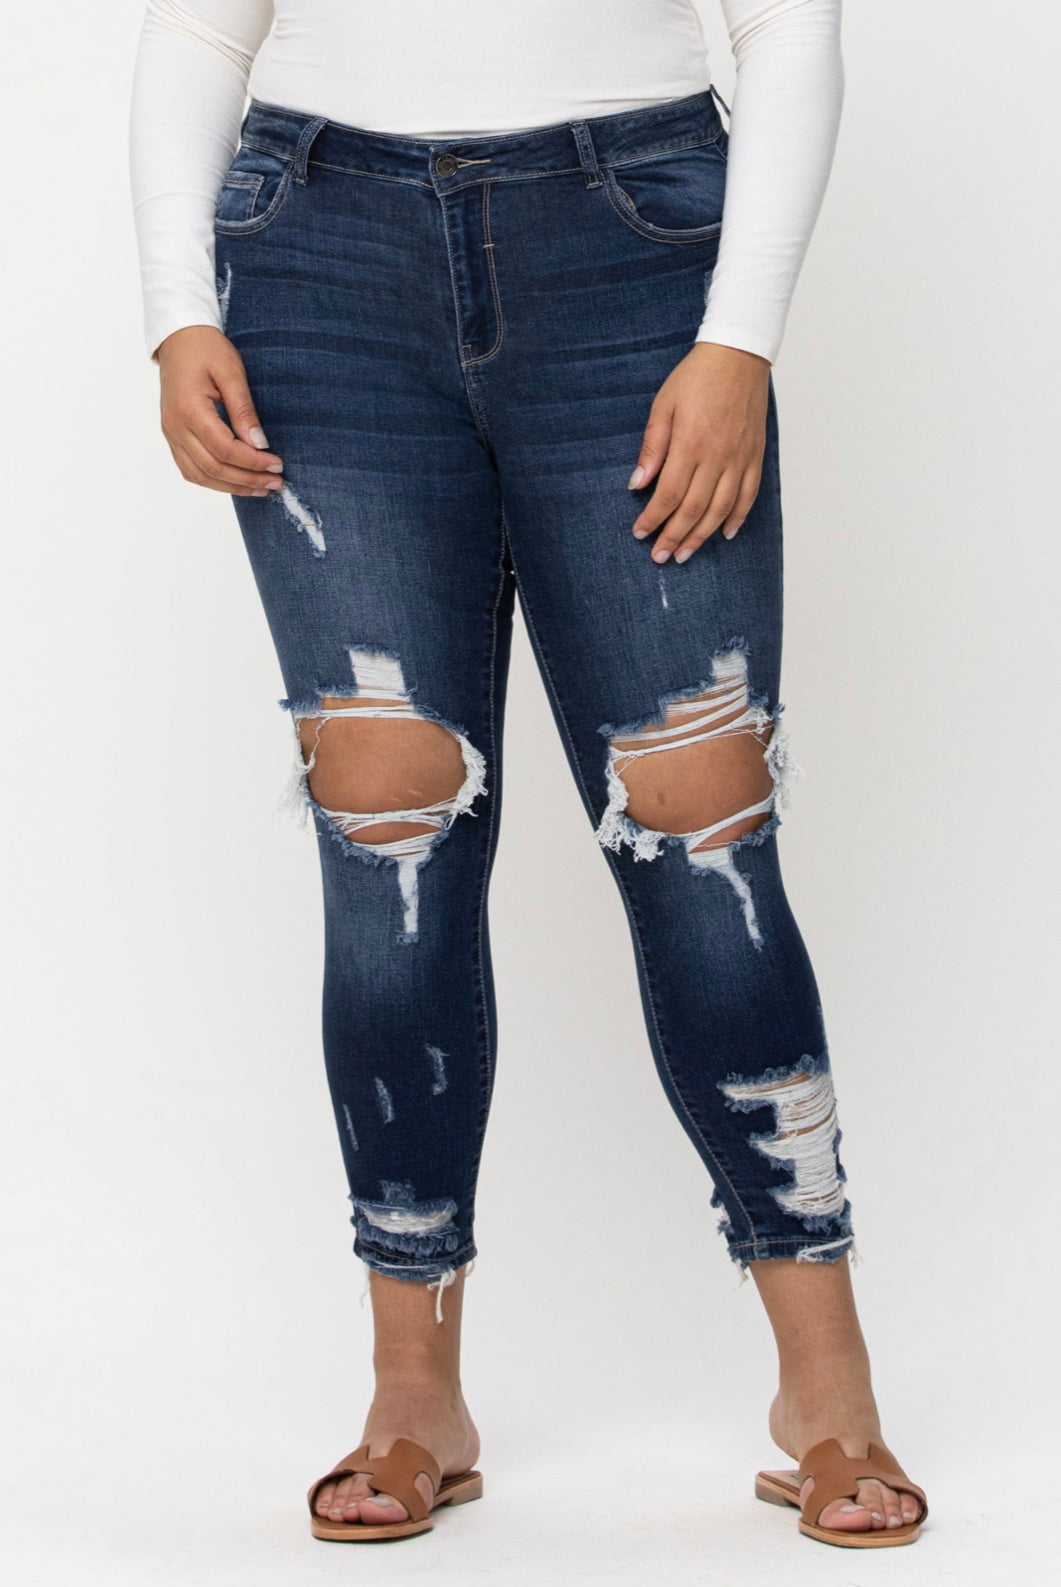 Cello Kendra High-Rise Ankle Skinny Jeans